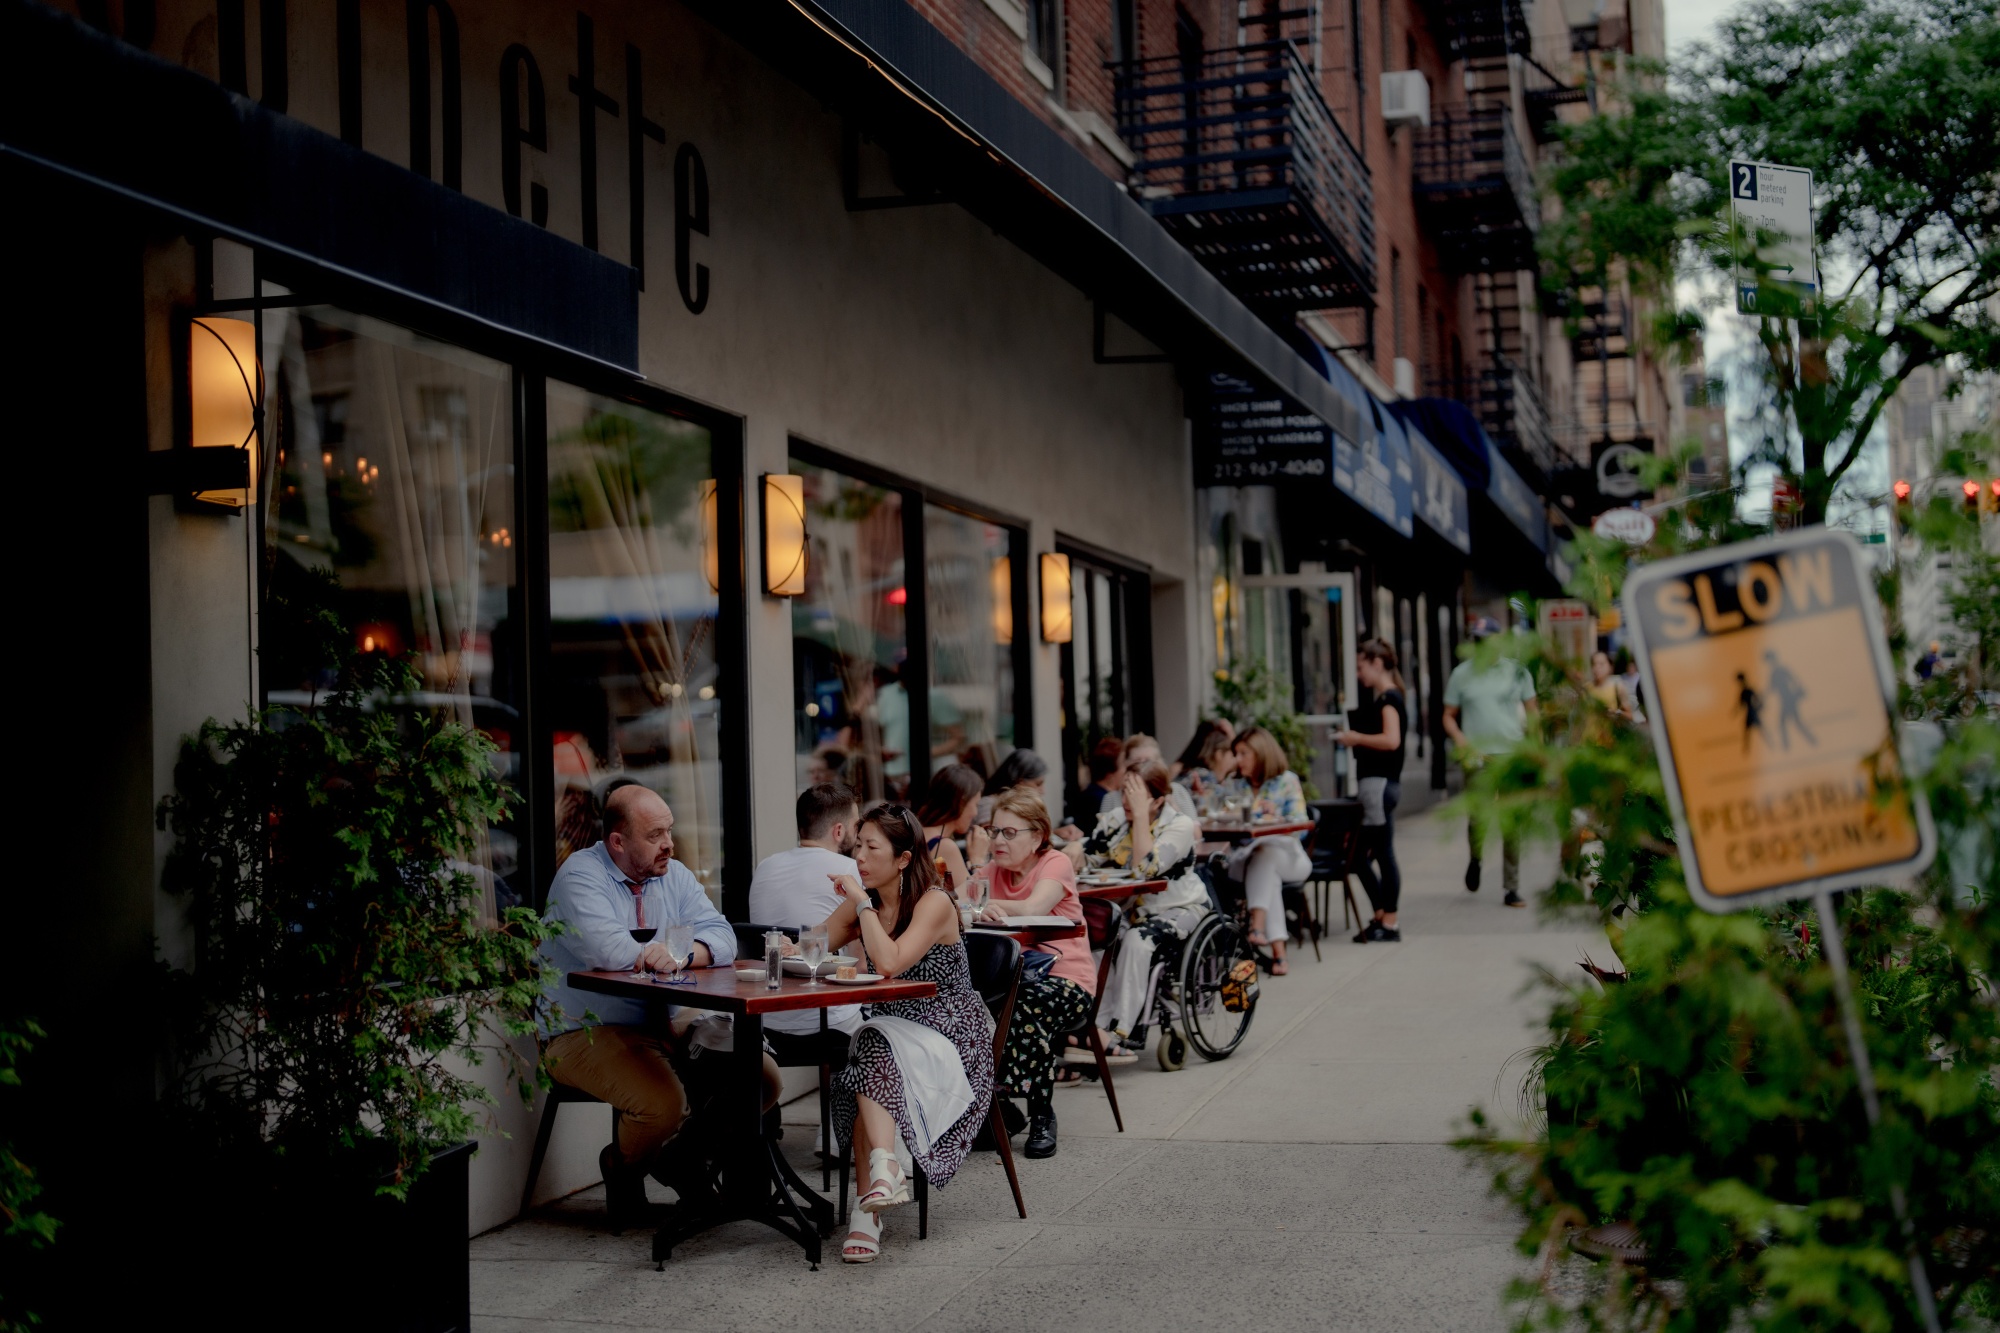 Customers dine outside at Copinette restaurant in New York.